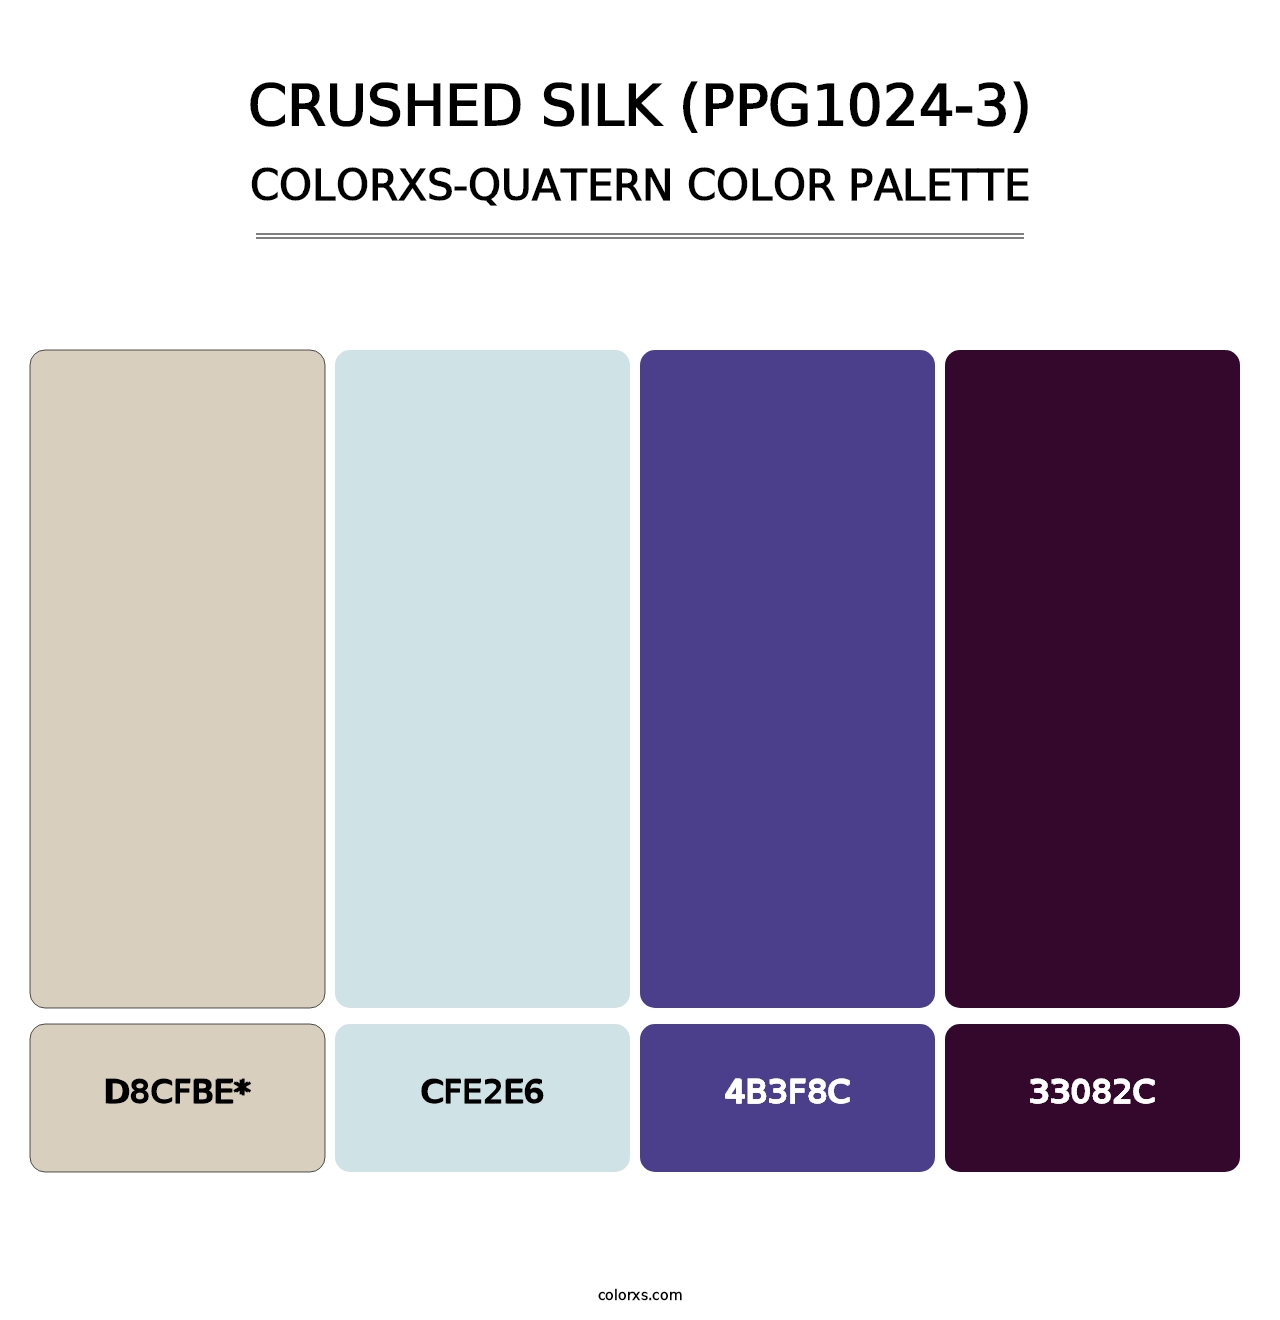 Crushed Silk (PPG1024-3) - Colorxs Quatern Palette